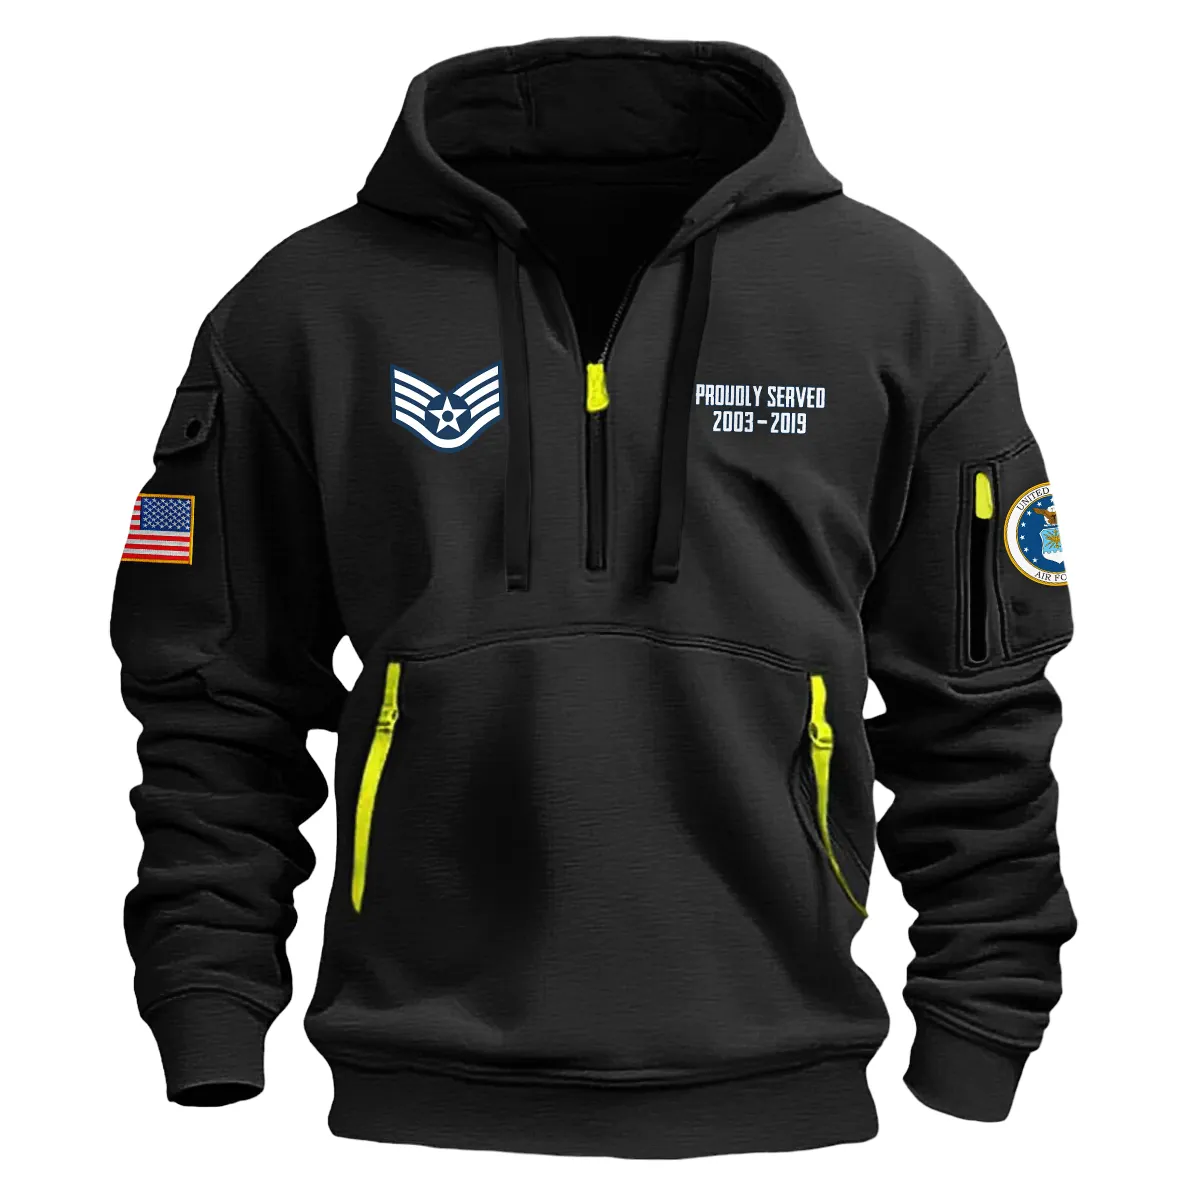 US Military All Branches! Personalized Gift E4-SRA U.S. Air Force Fashion Hoodie Half Zipper